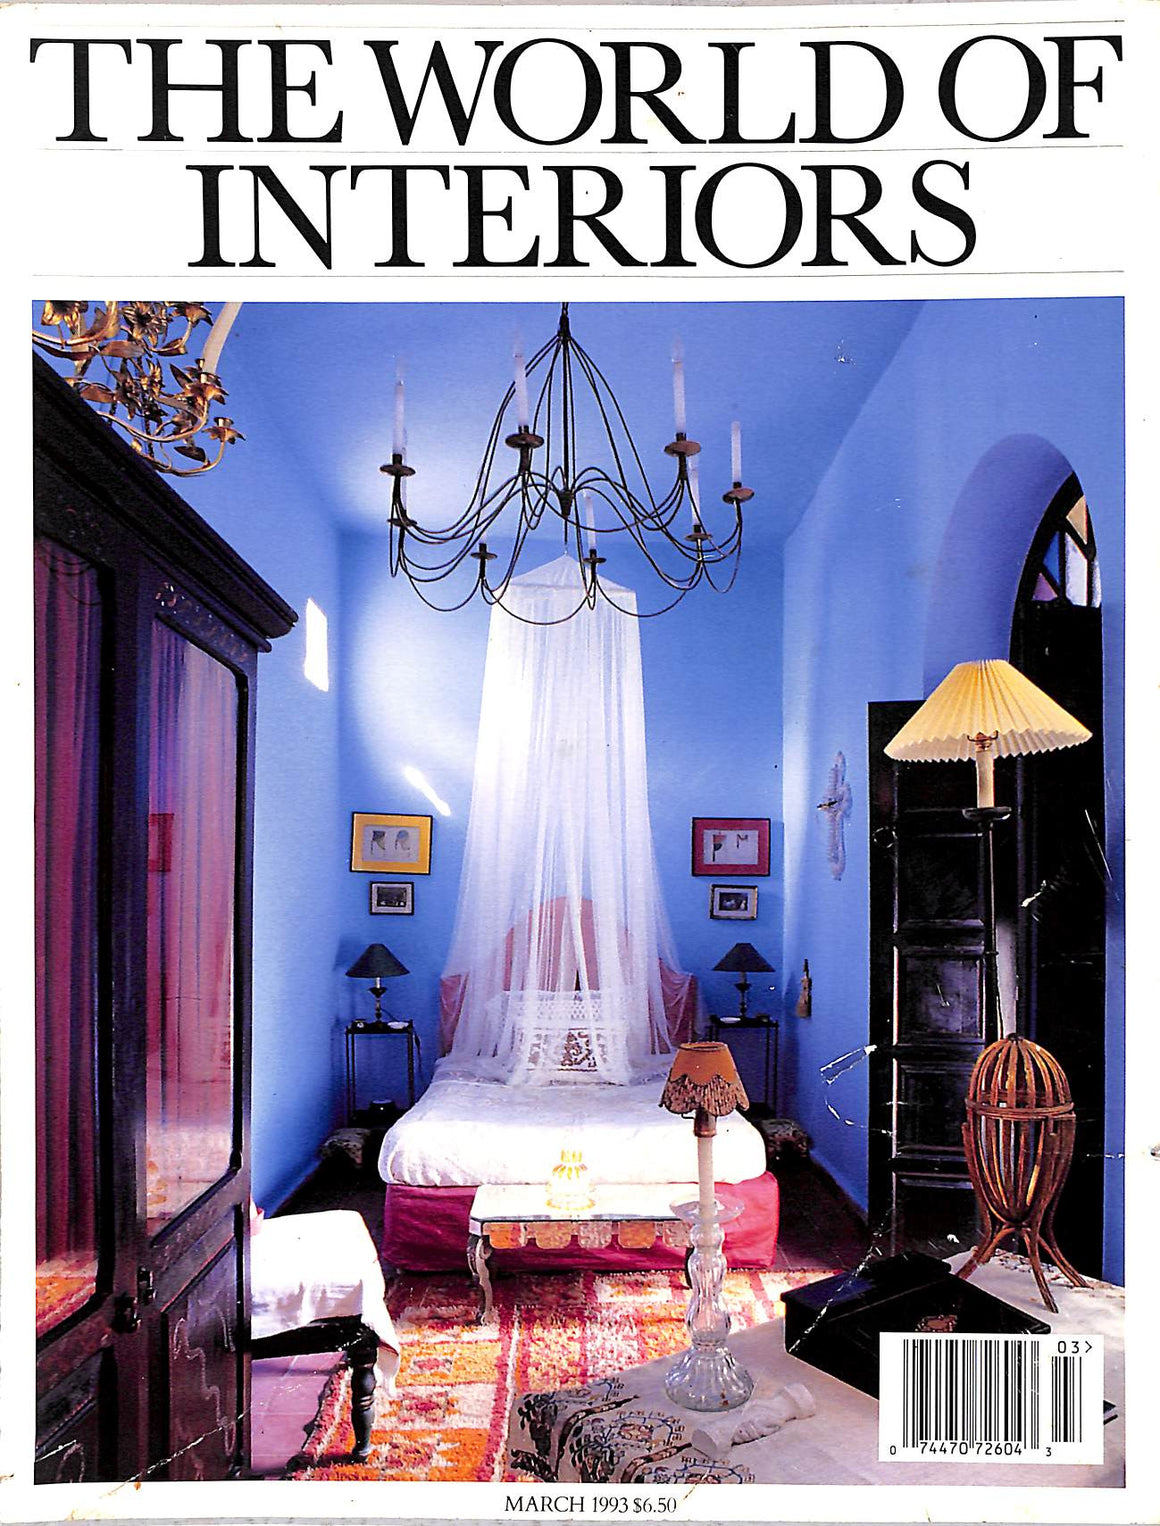 "The World Of Interiors" March 1993 (SOLD)